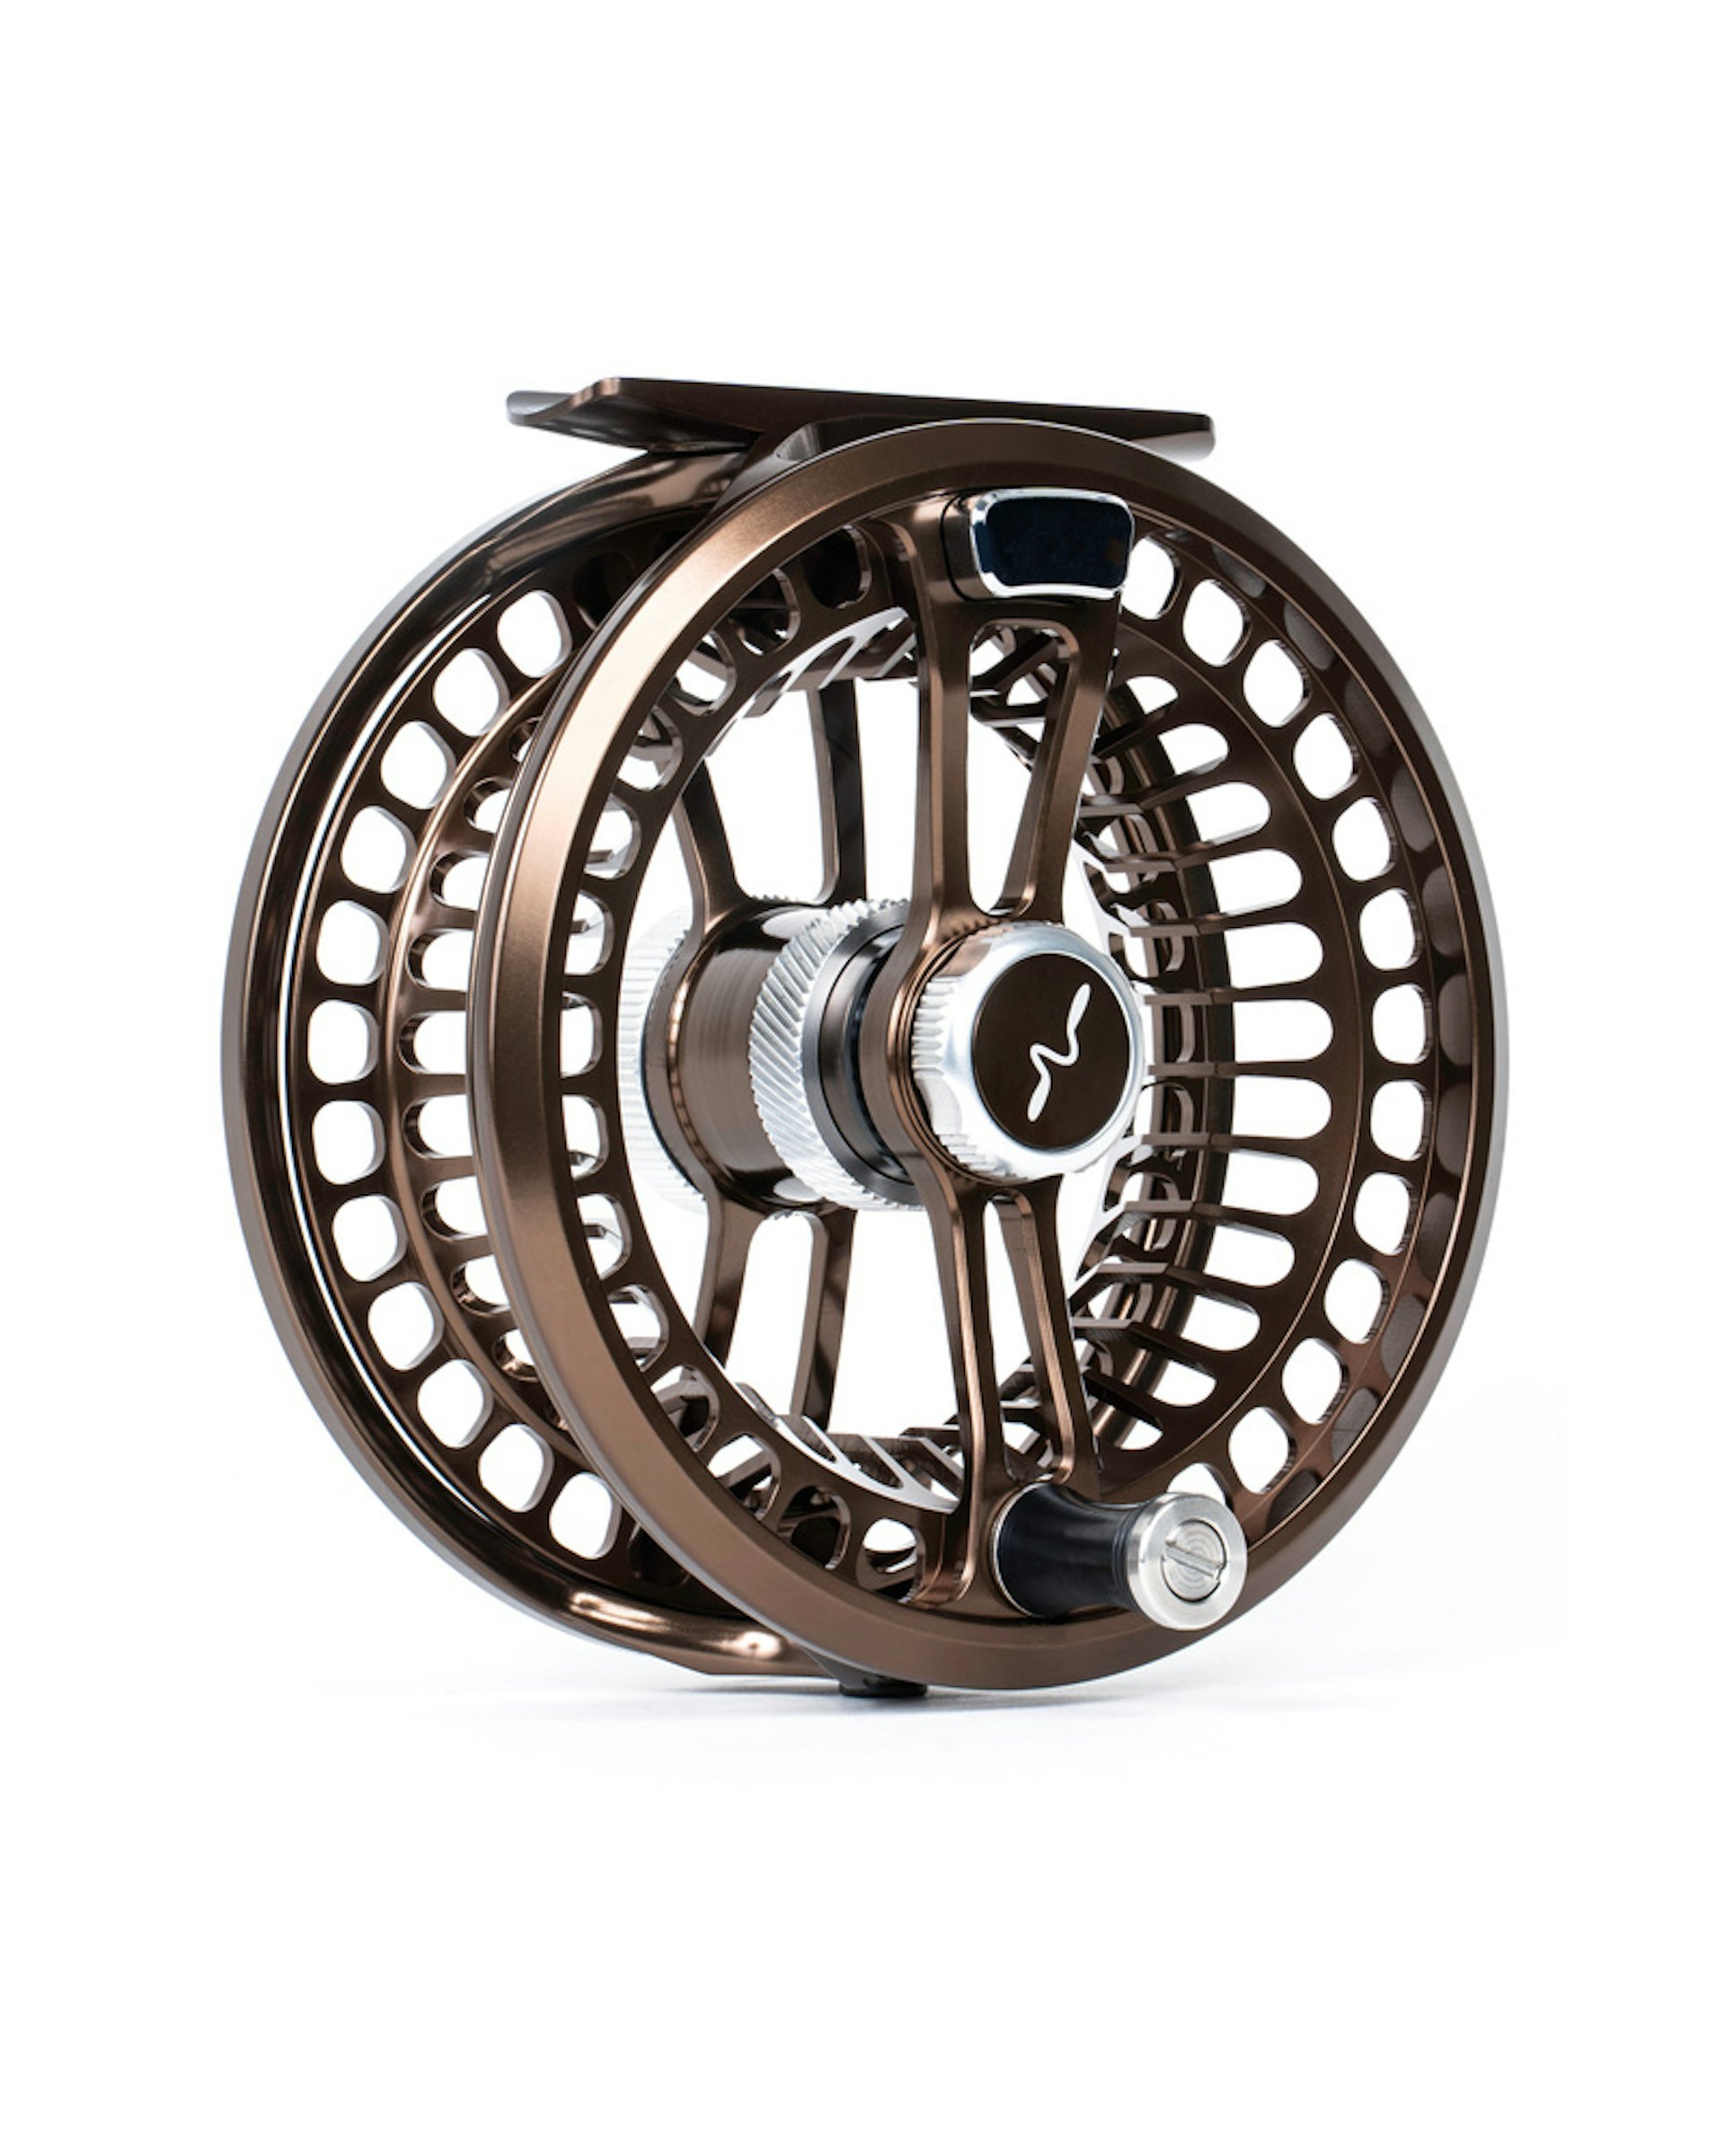 Guideline - New color of the Fario LW fly reel for spring